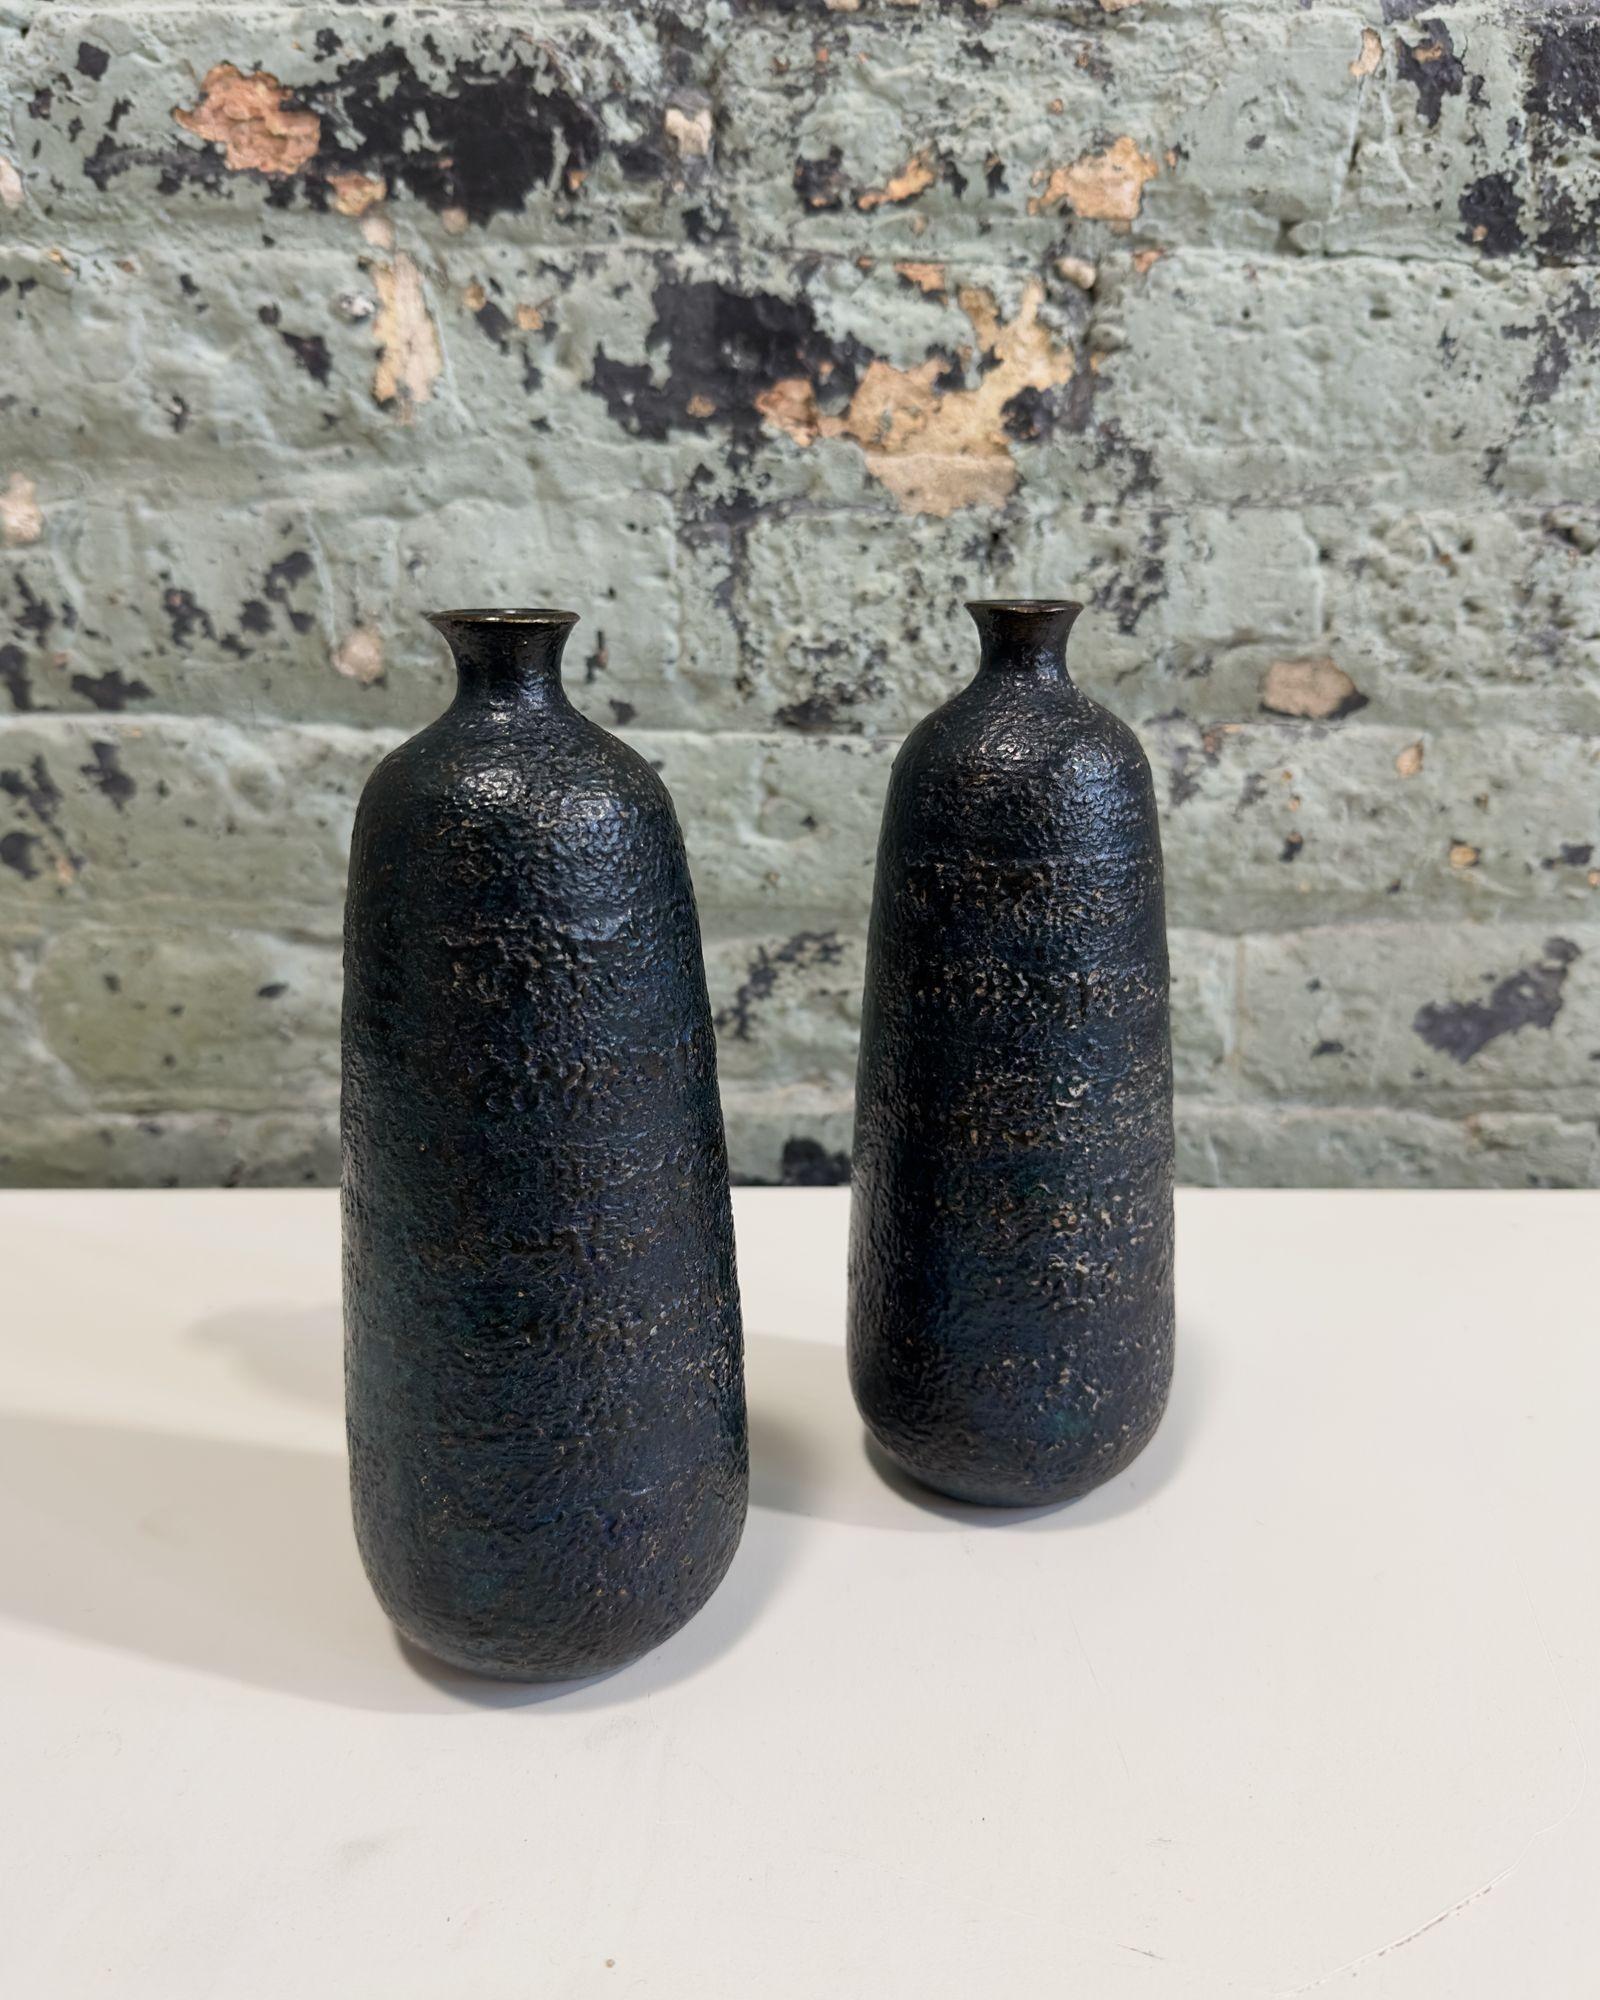 Pair Japanese Craftsman Bronze Vases Black Volcanic Patinated Enamel, Japan 1930's.
Vases have a vibrant color of black with a green/blue hue. Vases are quite heavy being solid bronze. Excellent condition.
Vases measure 9